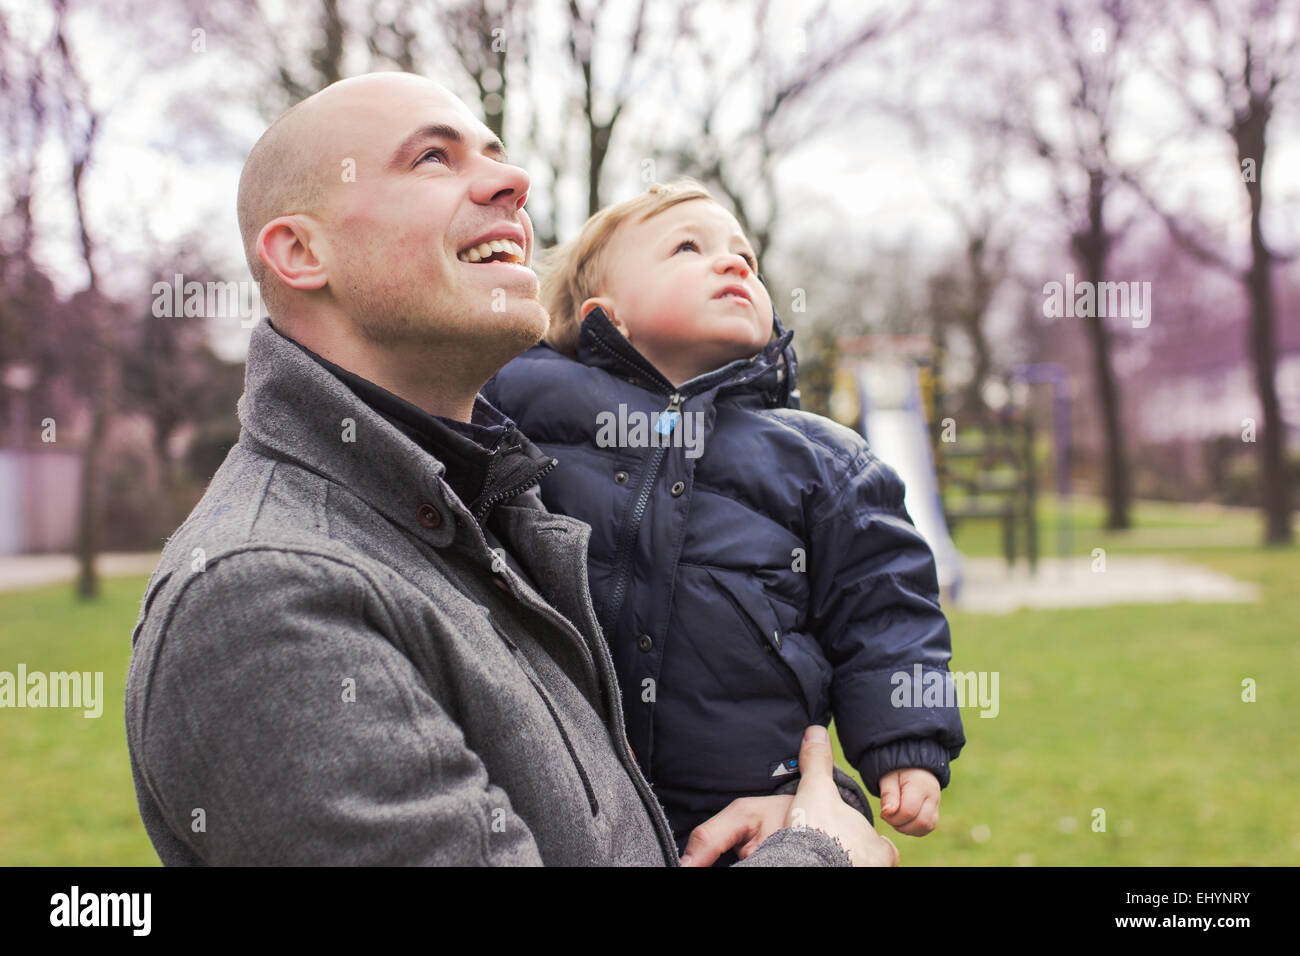 Father carrying baby son and looking up Stock Photo